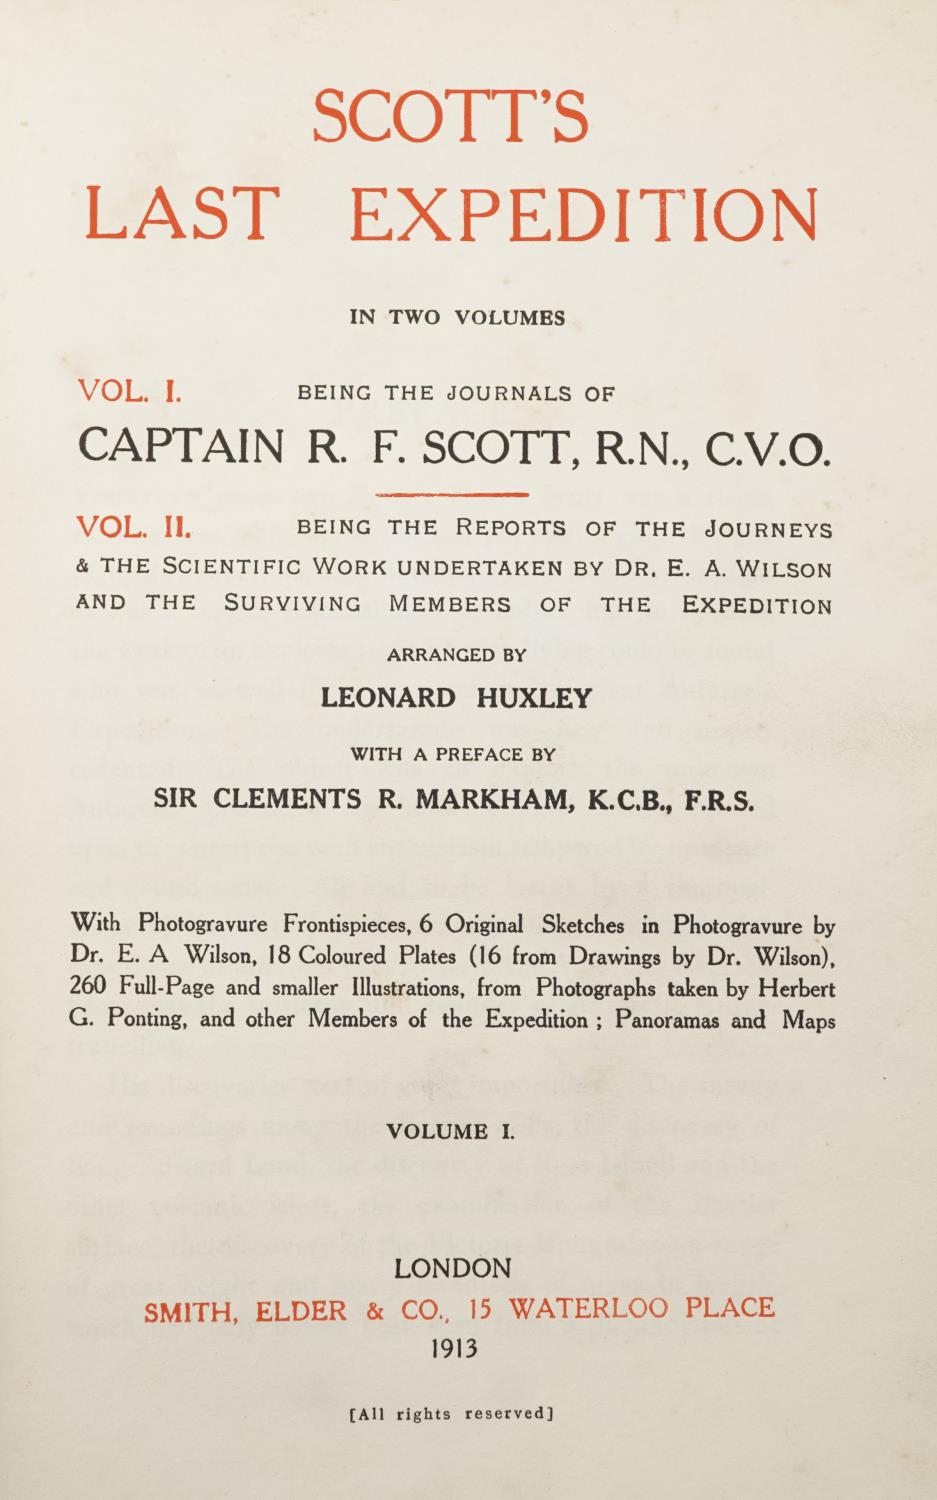 Scott's Last Expedition, two hardback books volumes 1 and 2, published by Smith Alder & Co 1913 - Image 2 of 3